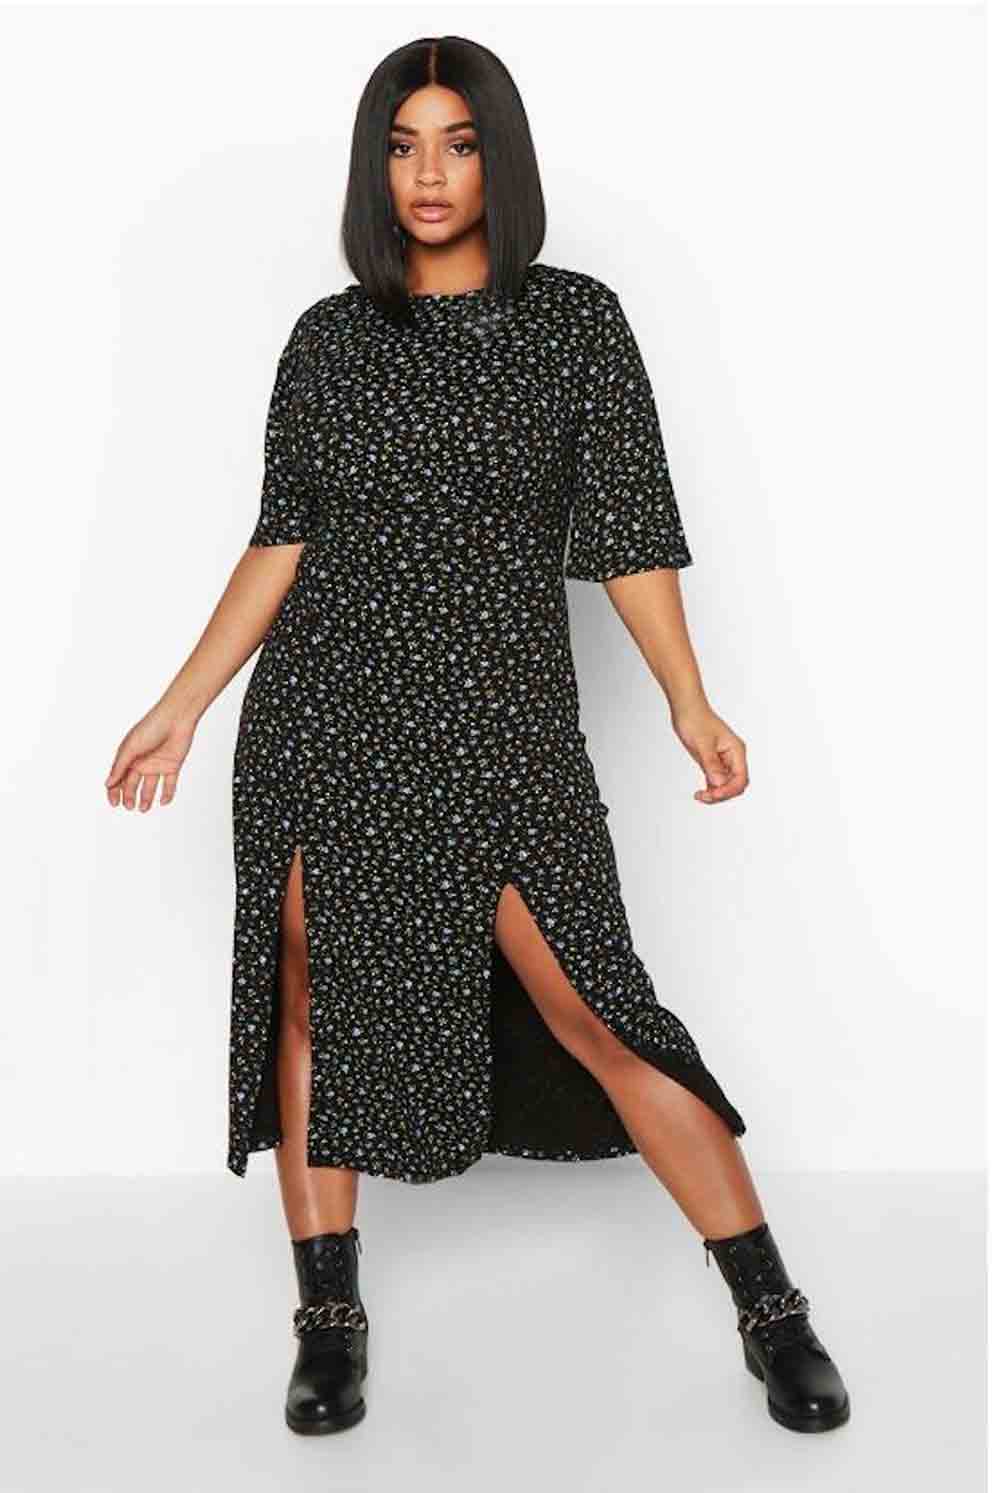 Expectation v reality as Boohoo disaster dress shows off customer's ...